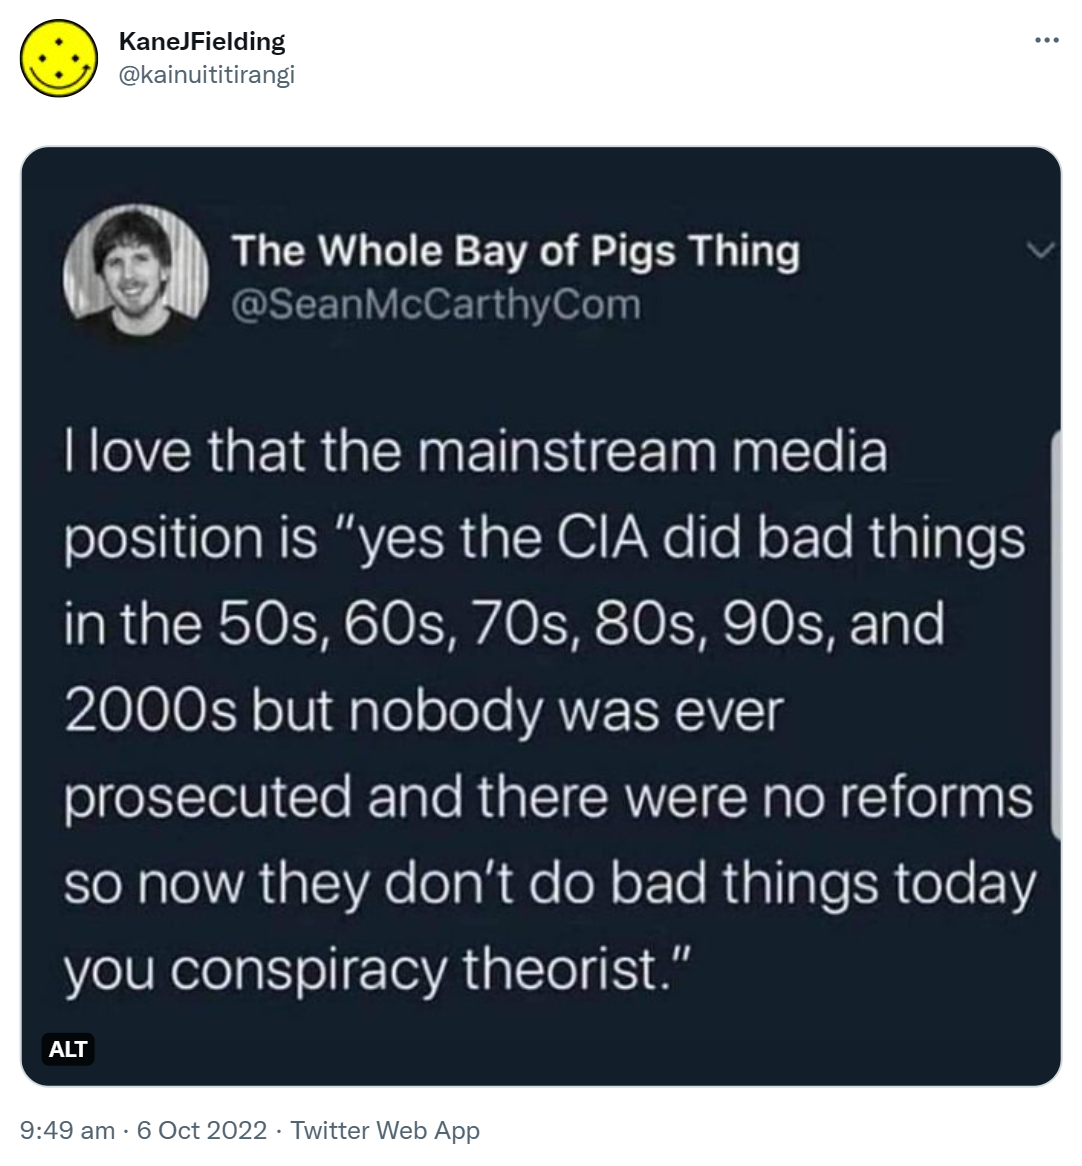 The Whole Bay of Pigs Thing @SeanMcCarthyCom I love that the mainstream media position is, yes the CIA did bad things in the 50s, 60s, 70s, 80s, 90, and 2000s but nobody was ever prosecuted and there were no reforms so now they don't do bad things today you conspiracy theorists. 9:49 am · 6 Oct 2022.